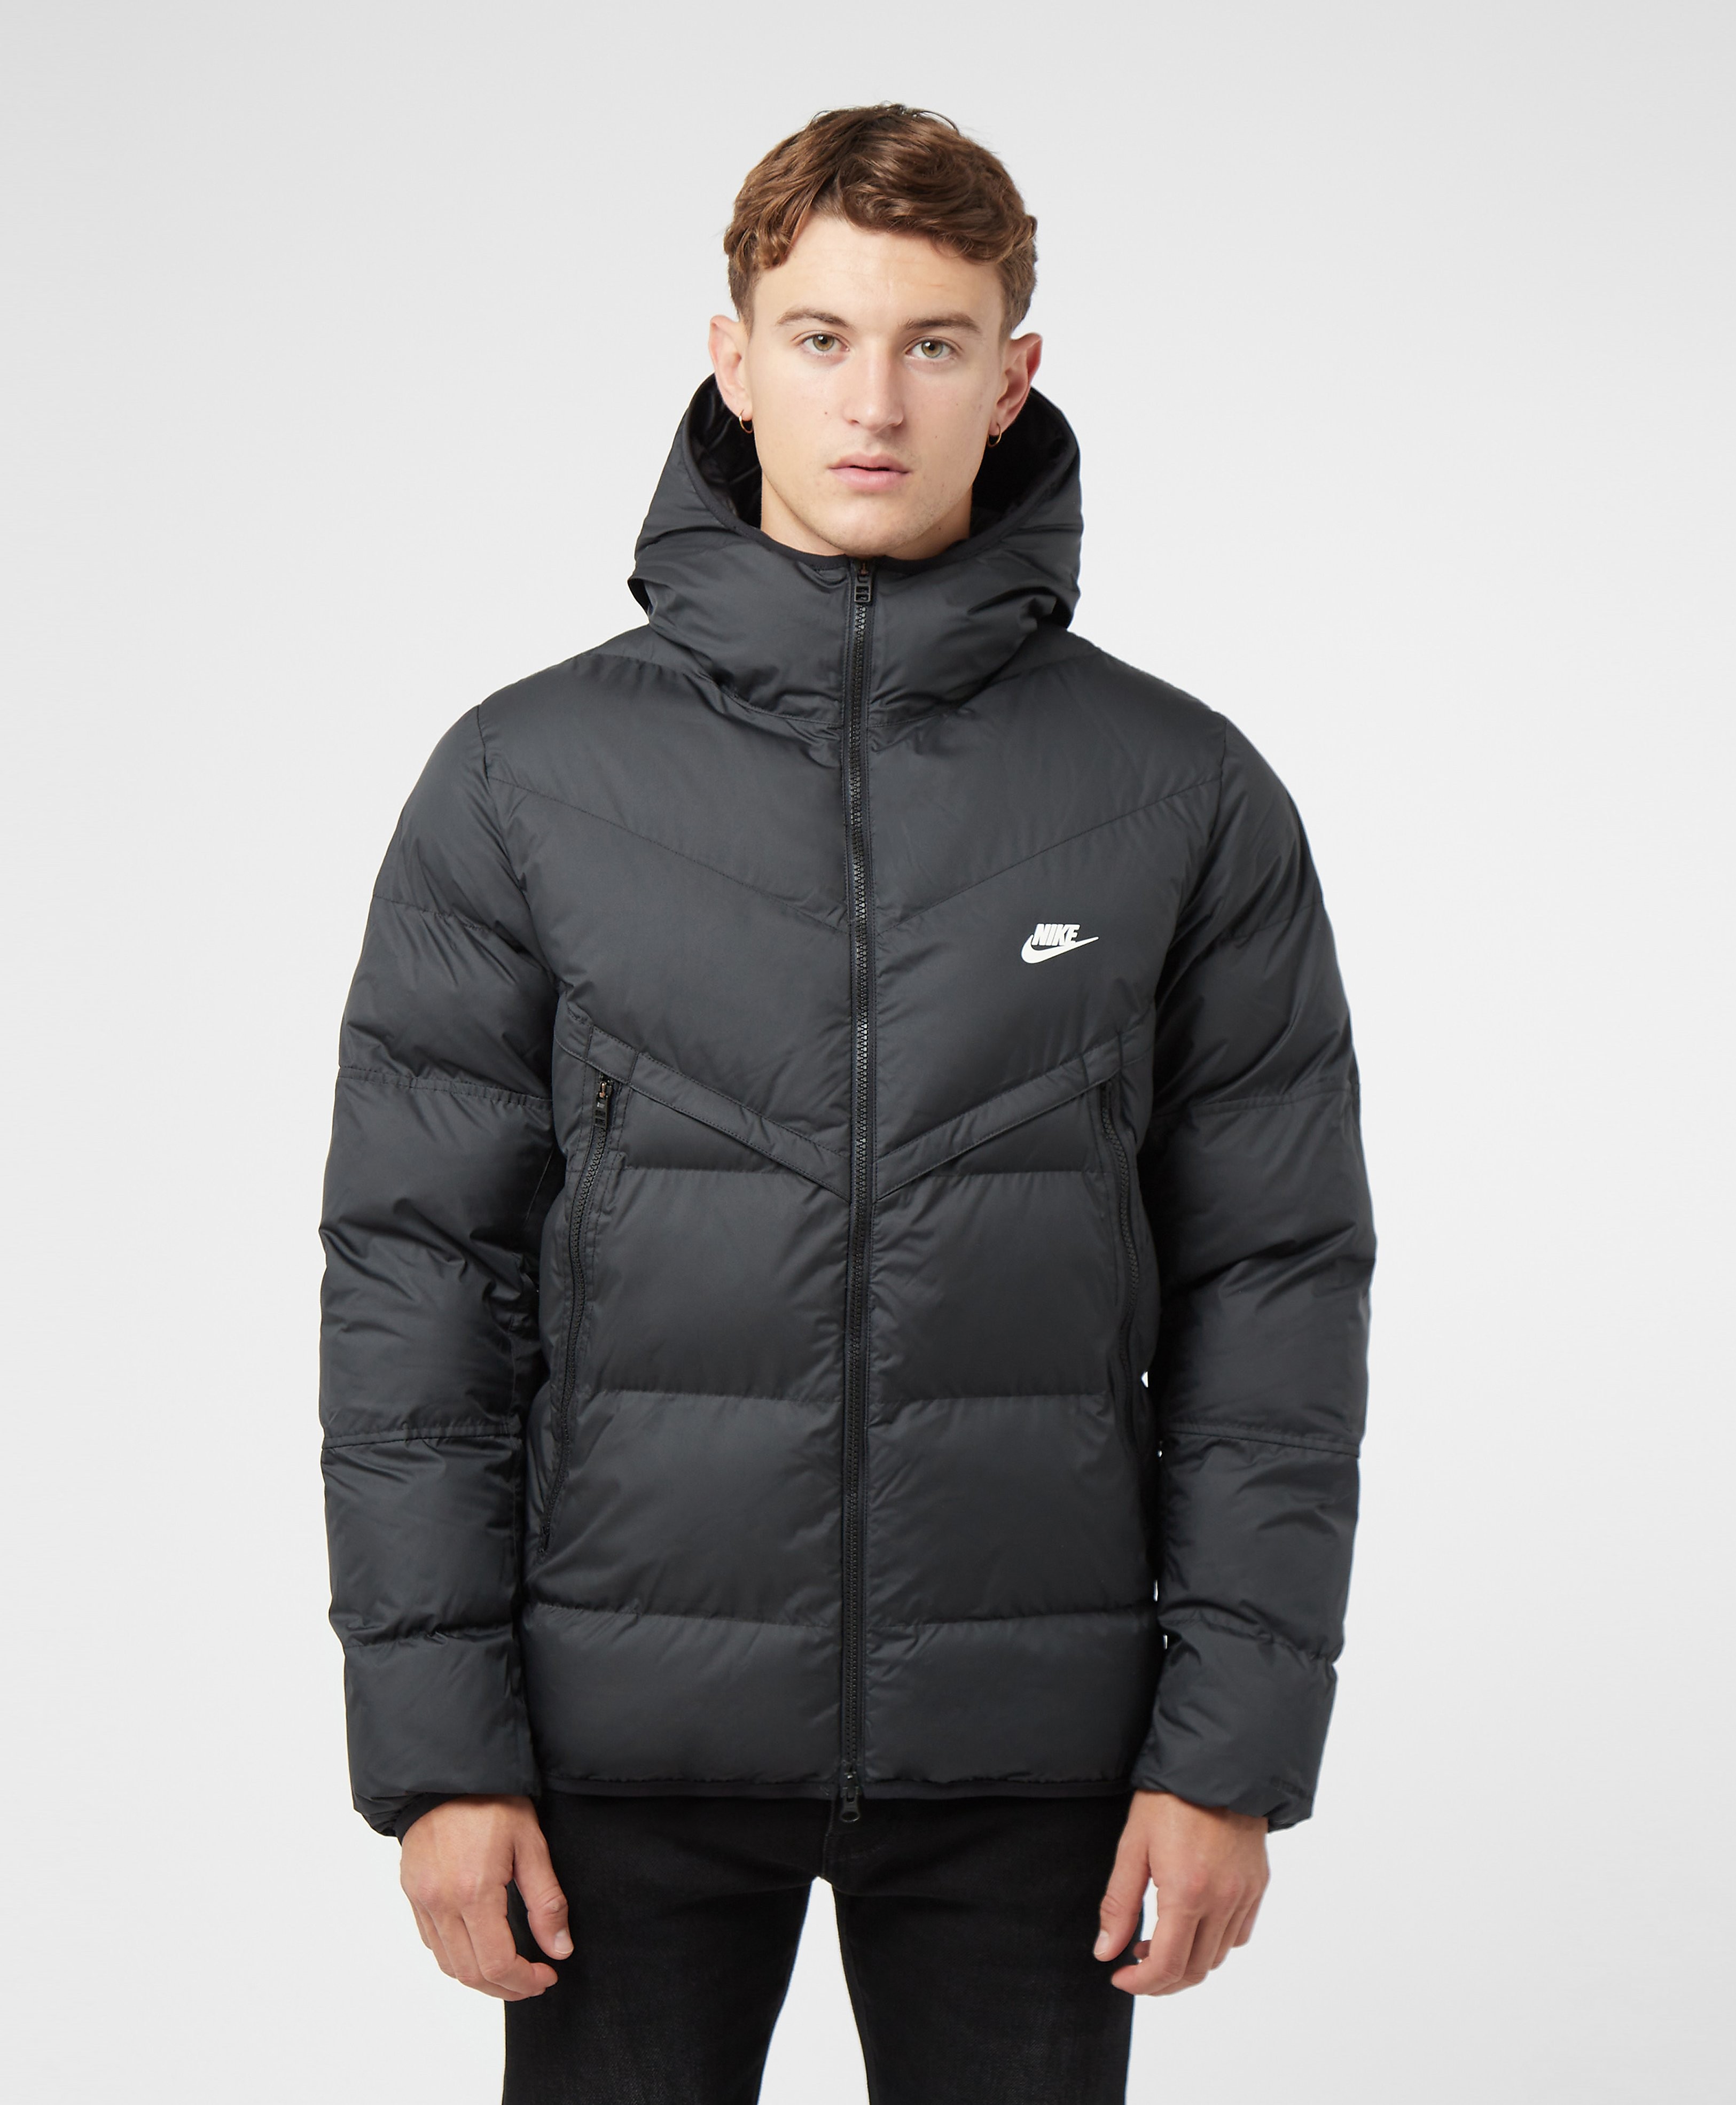 Black nike windrunner - Find the best price at PriceSpy